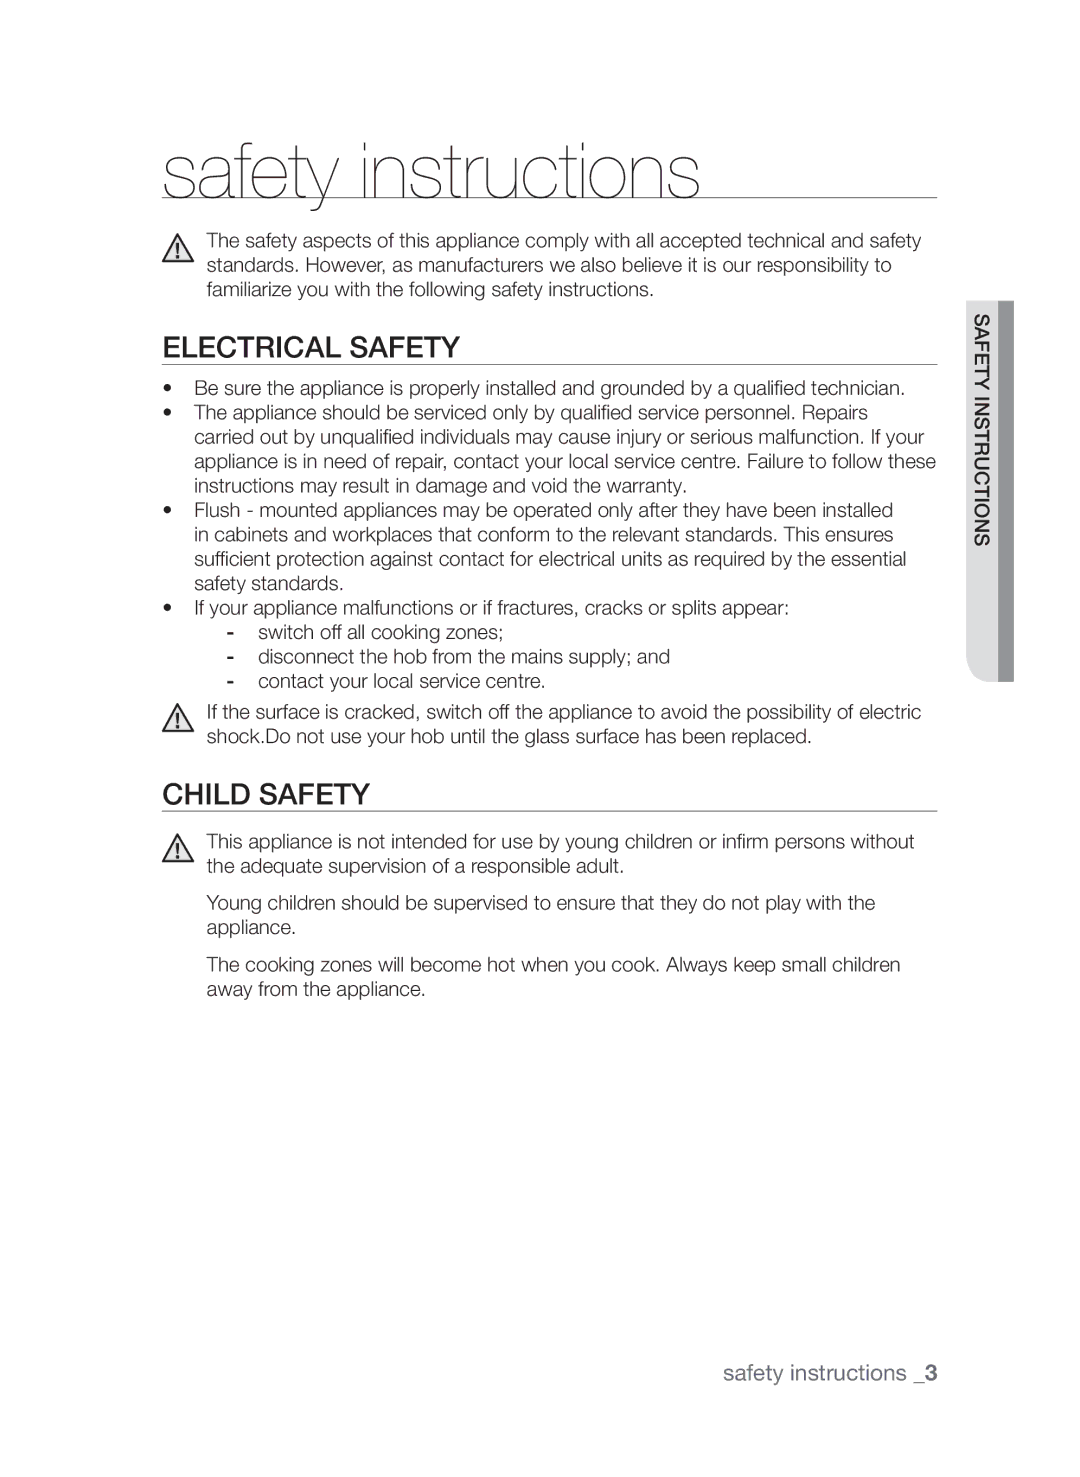 Samsung CTI613GIN/XEO, CTI613GIN/XEE manual Safety instructions, Electrical safety, Child safety 